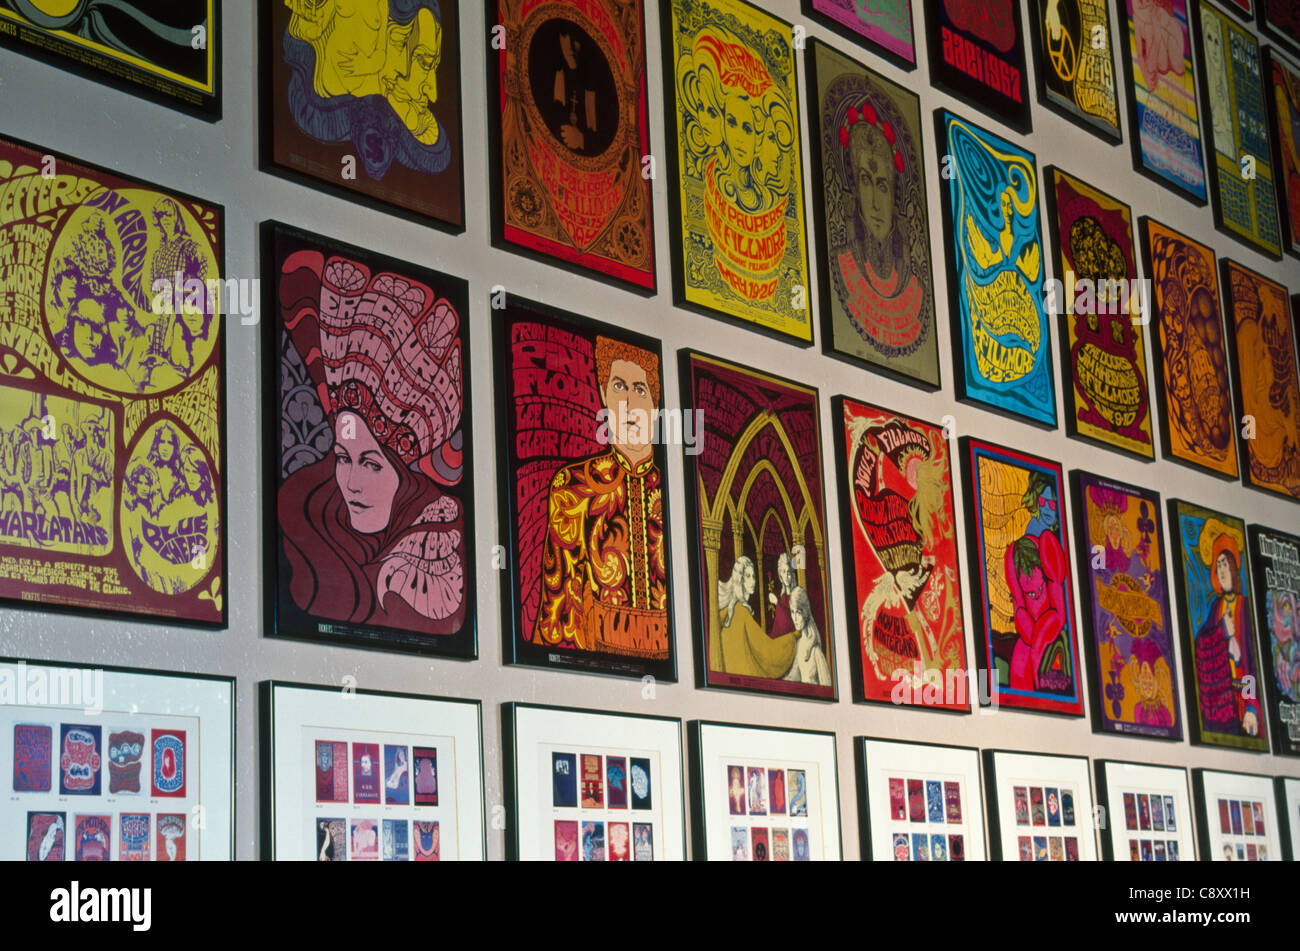 The legendary Poster Room at Fillmore West, San Francisco, California Stock Photo